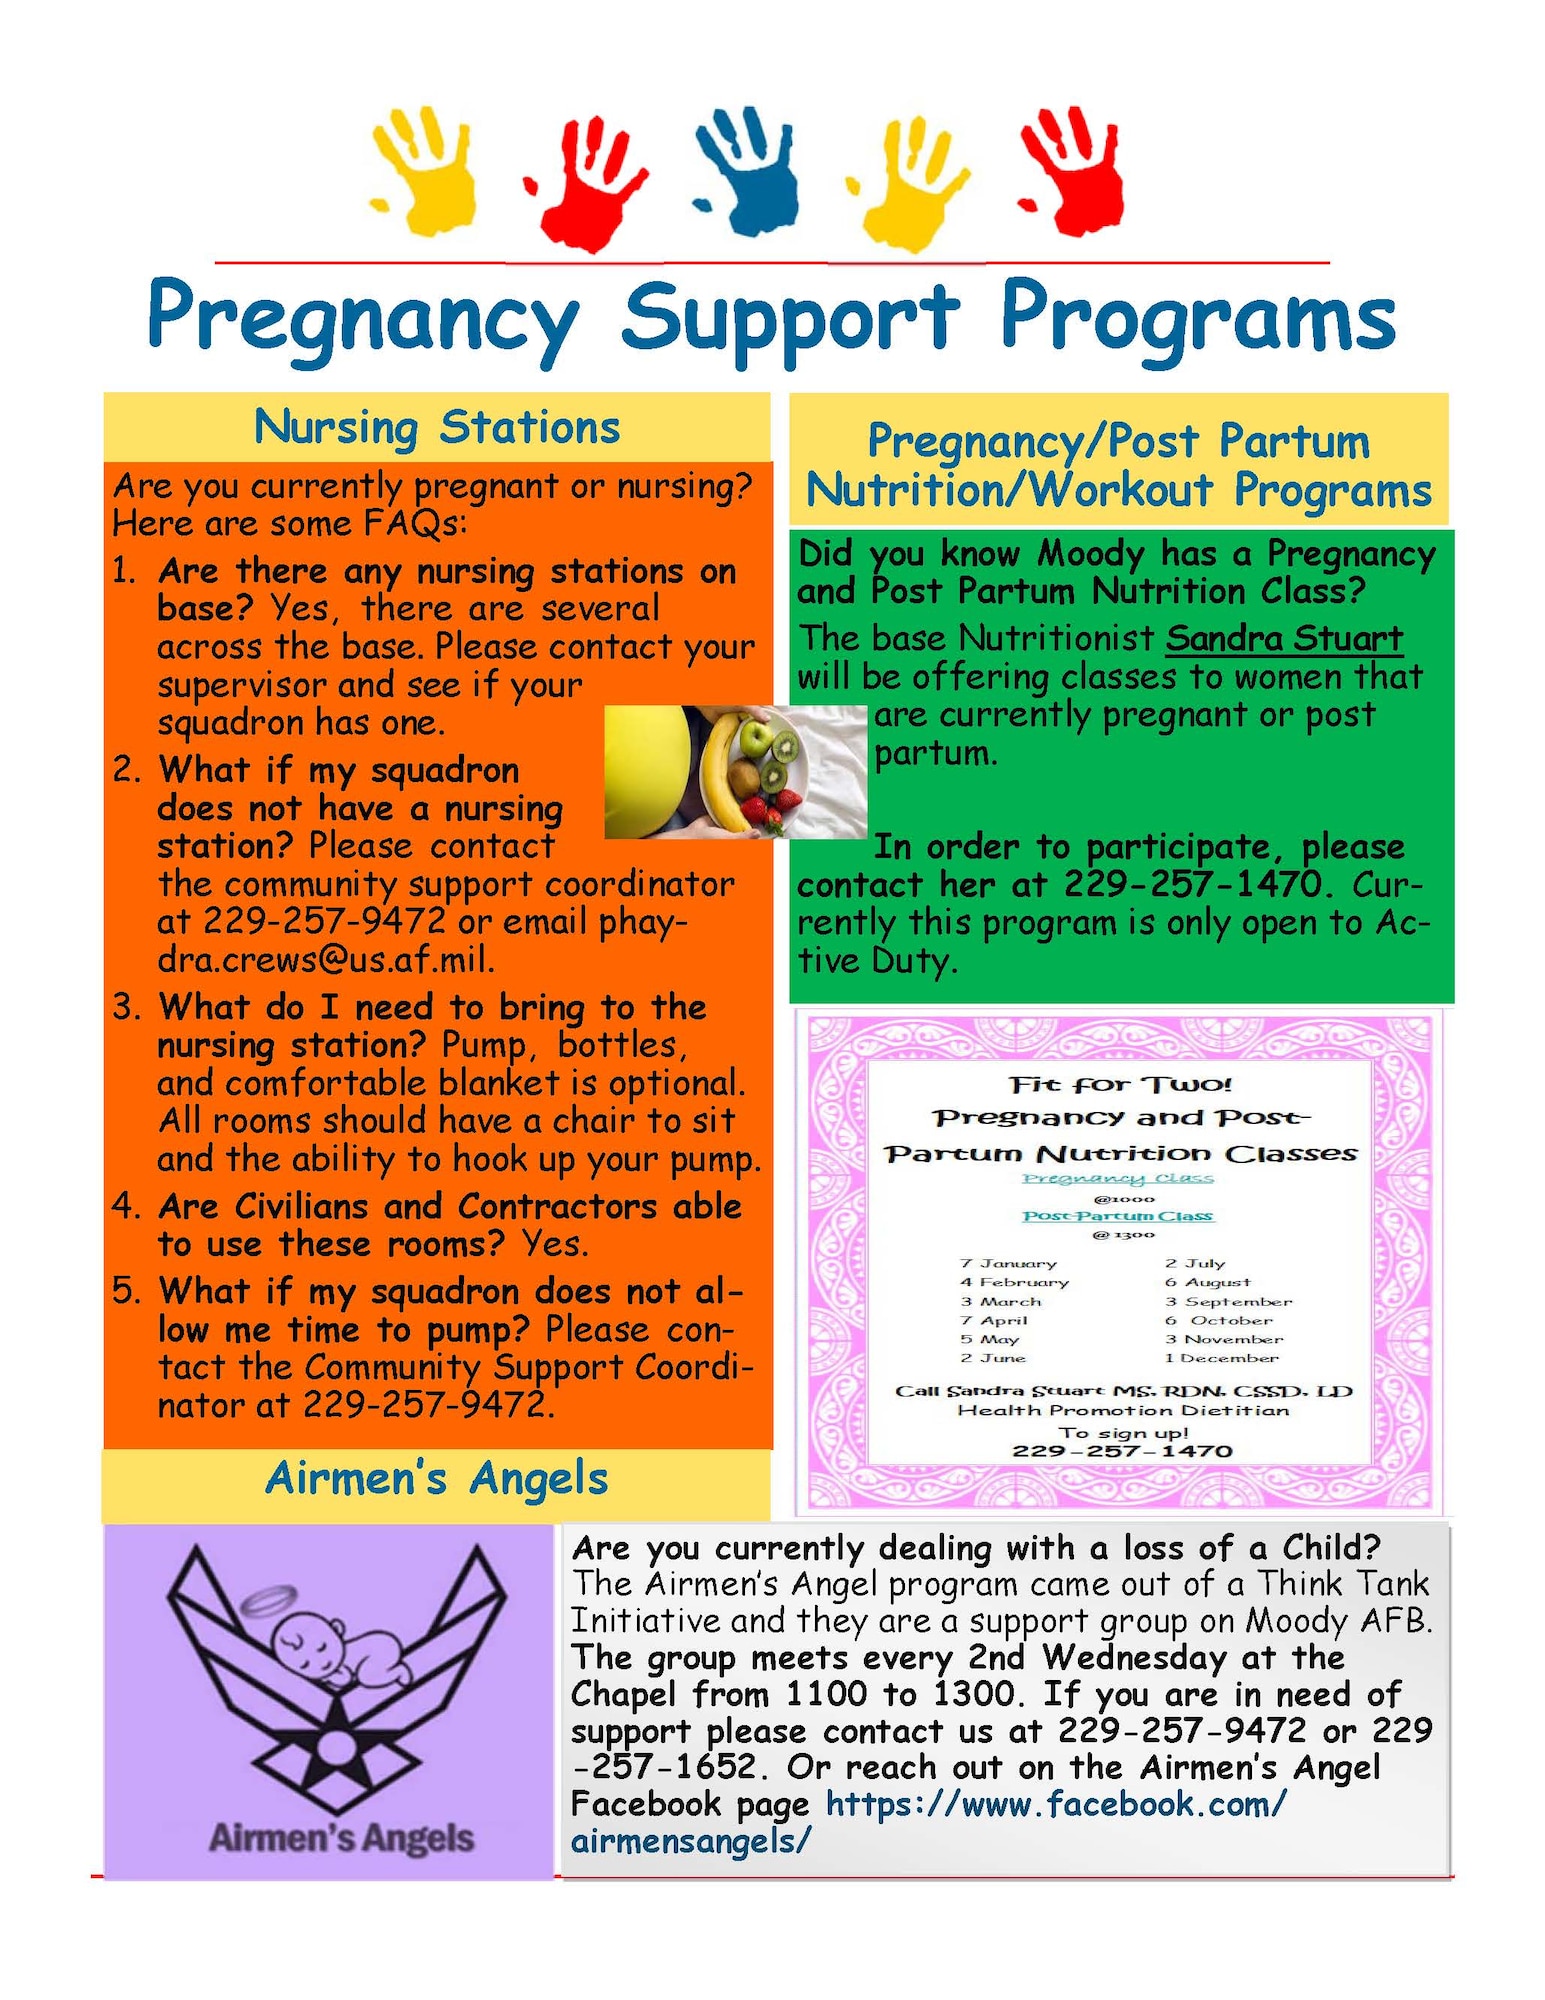 Graphic of Moody Air Force Base pregnancy support program